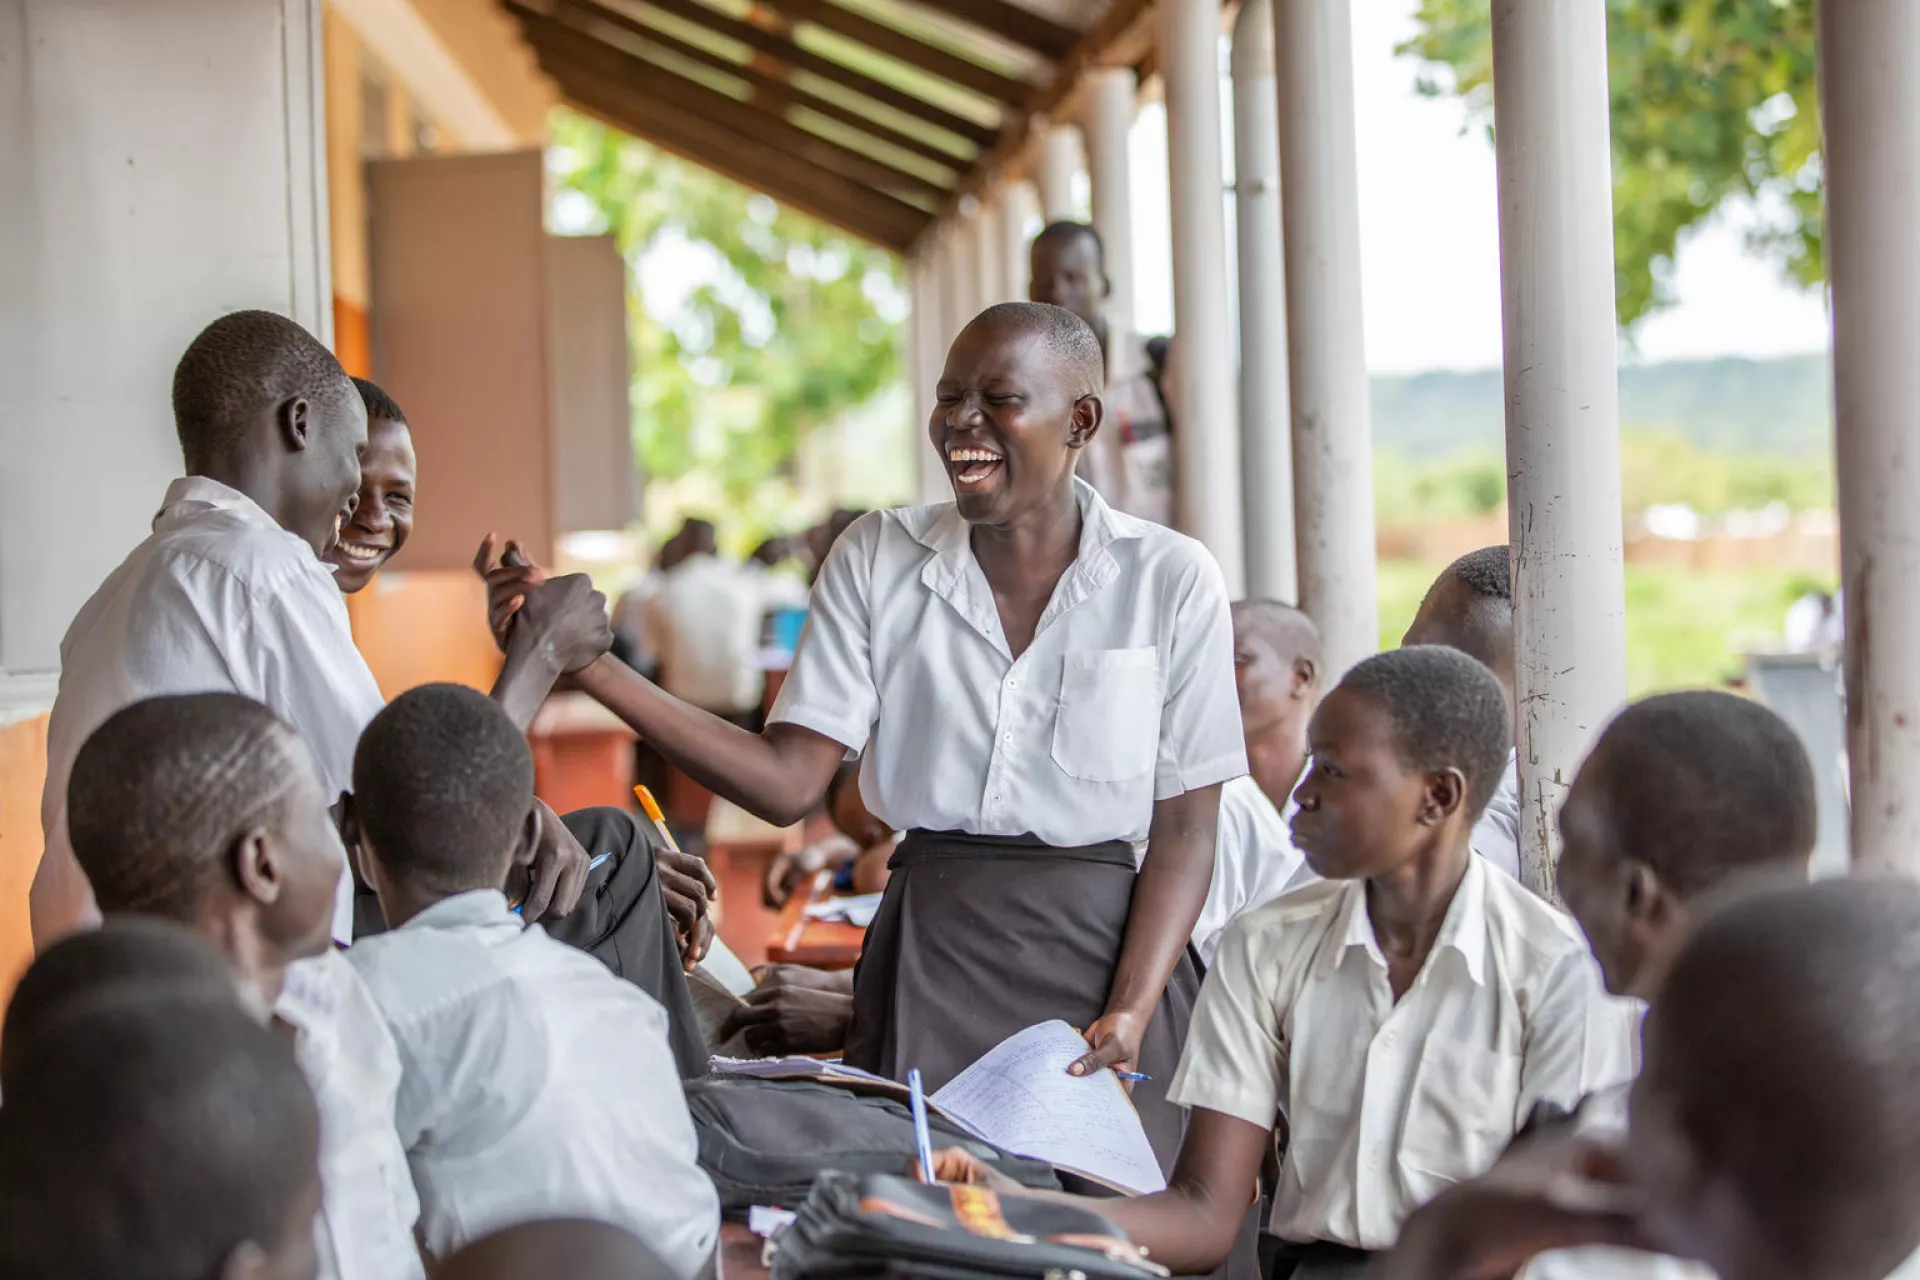 A 17-year-old girl laughs with friends outside their school in Uganda, 2019.